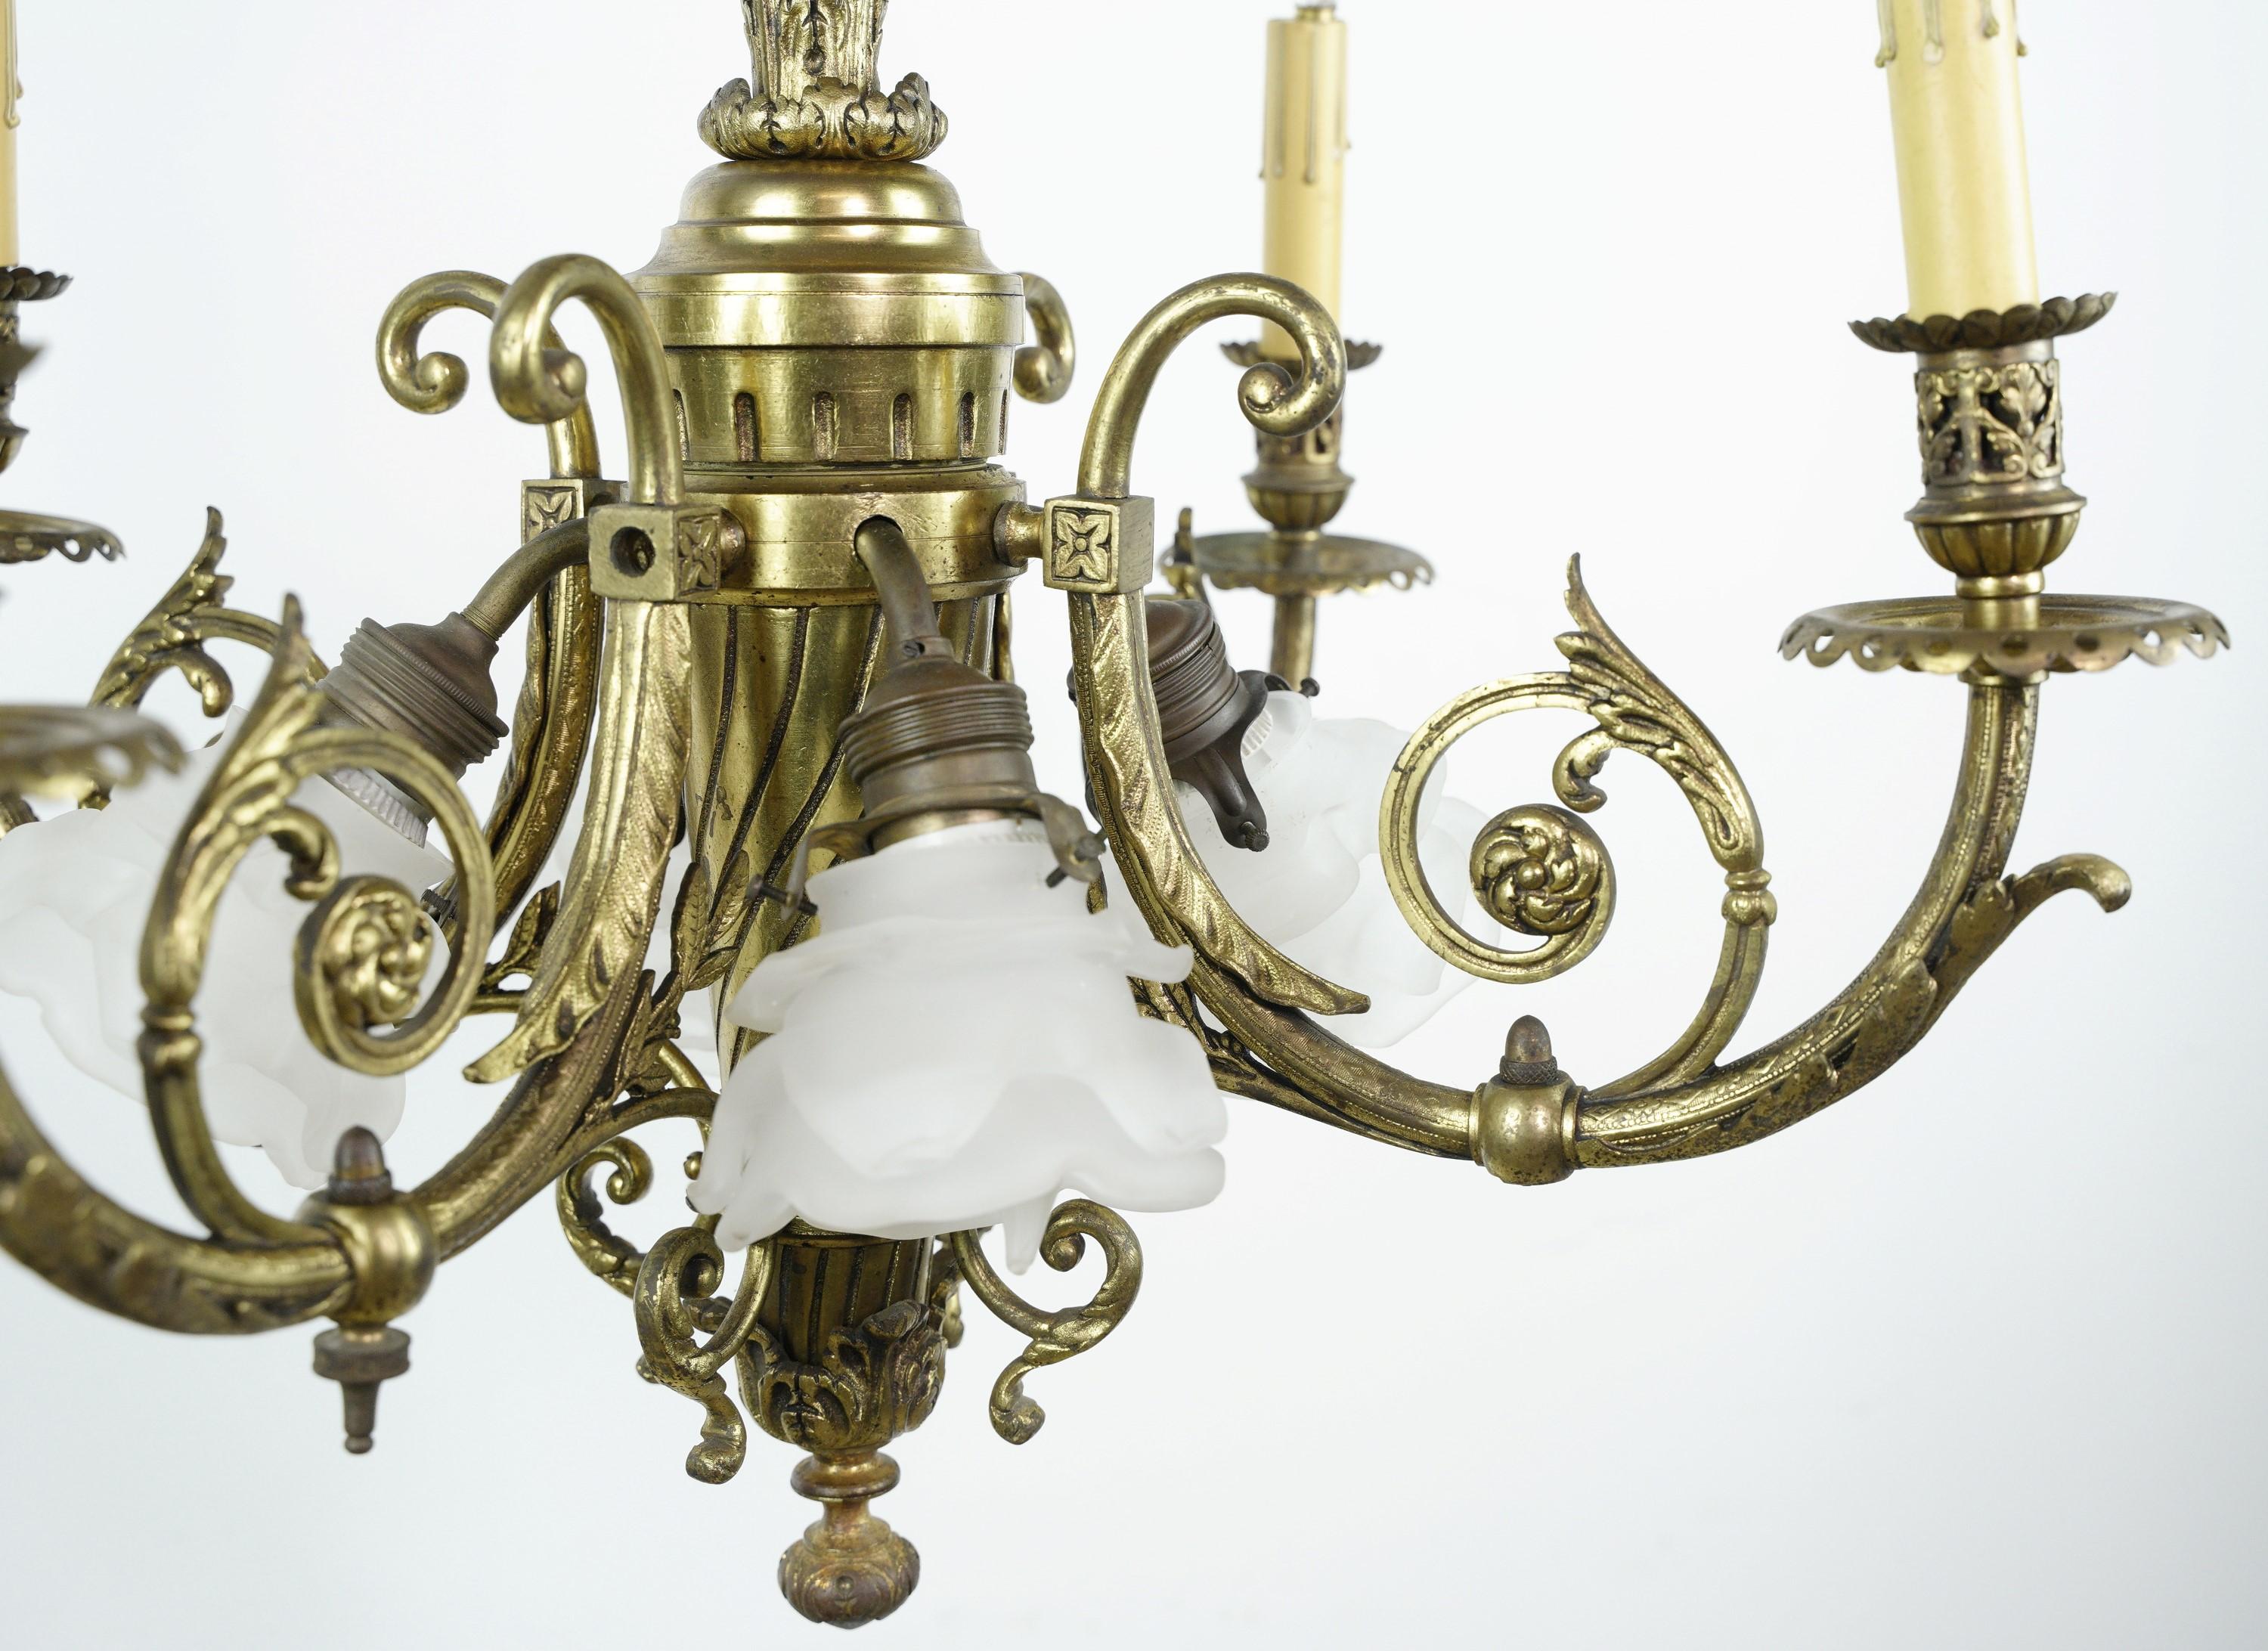 19th Century cast brass floral design chandelier featuring four candlestick arms and four down lights with frosted floral glass shades. Cleaned and restored. This is in good condition, with some wear from age. Please note, this item is located in